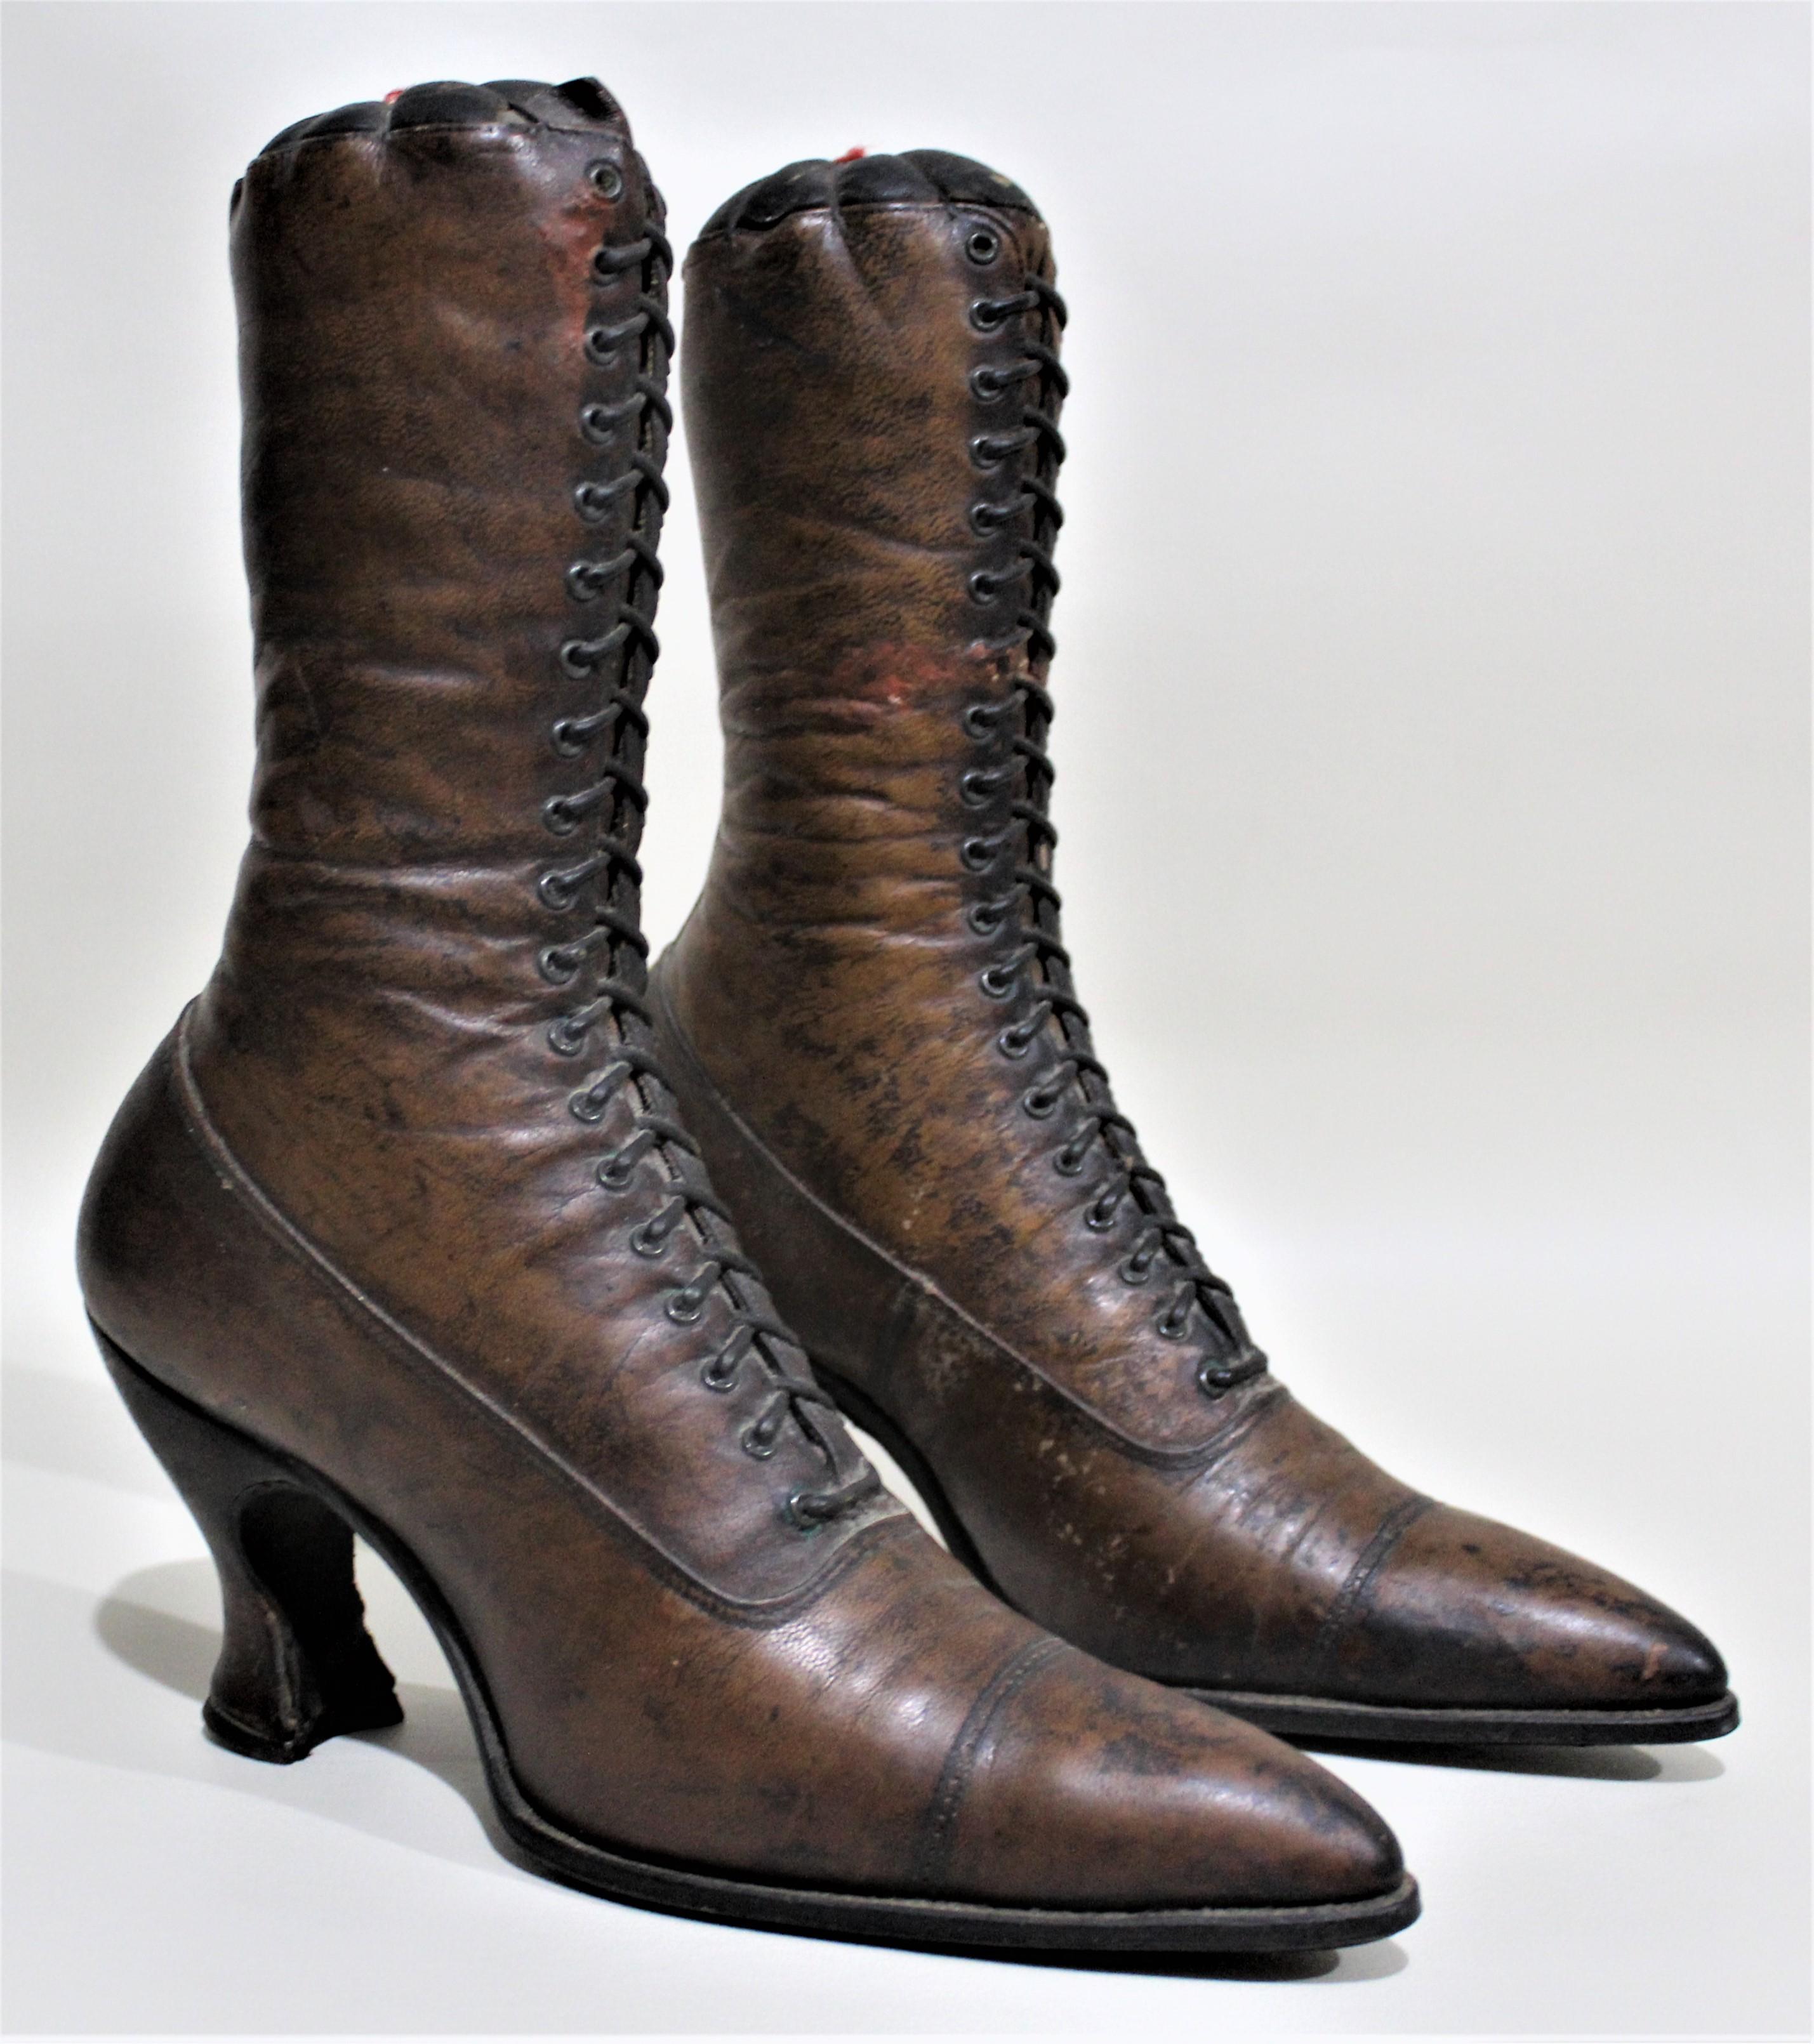 Pair of antique Victorian ladies high boots constructed of brown leather and used as mercantile models for a store display. Each sole has an impressed mark of 